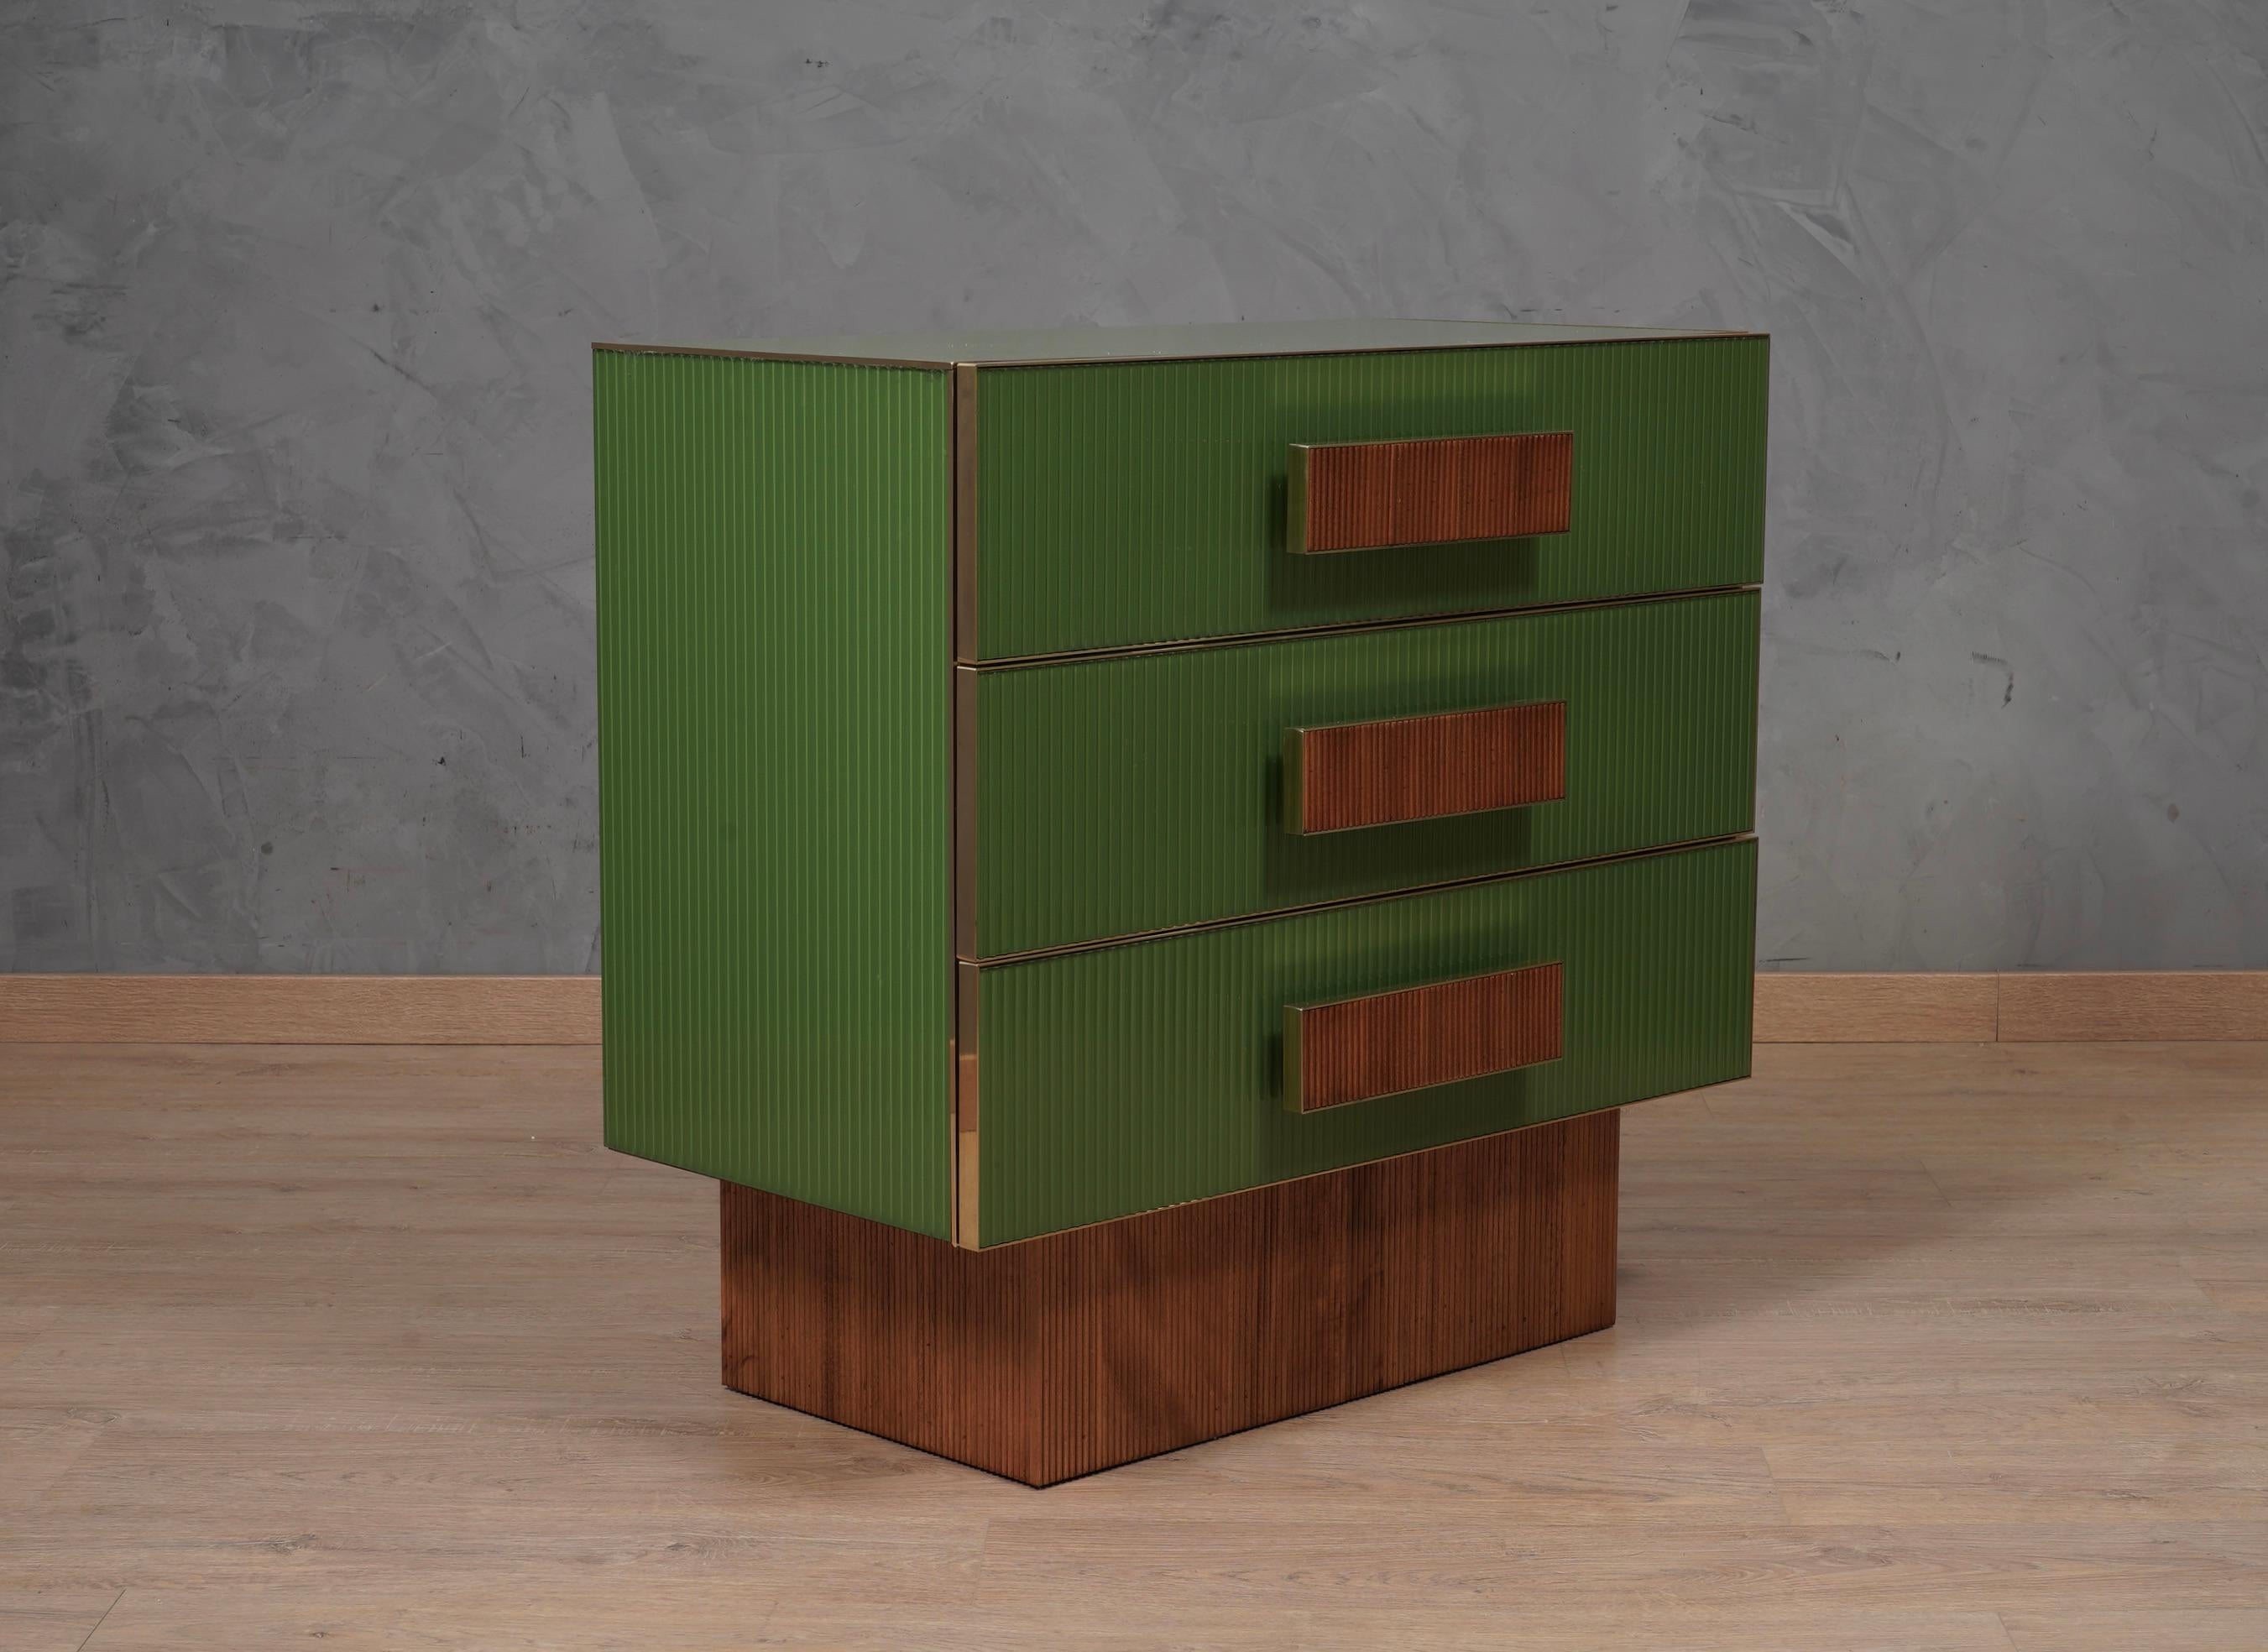 An unmistakable piece of furniture due to its green color, it exemplifies timeless design and exceptional craftsmanship. With the unique characteristics of fluted glass and meticulous attention to detail, this chest of drawers testifies to a